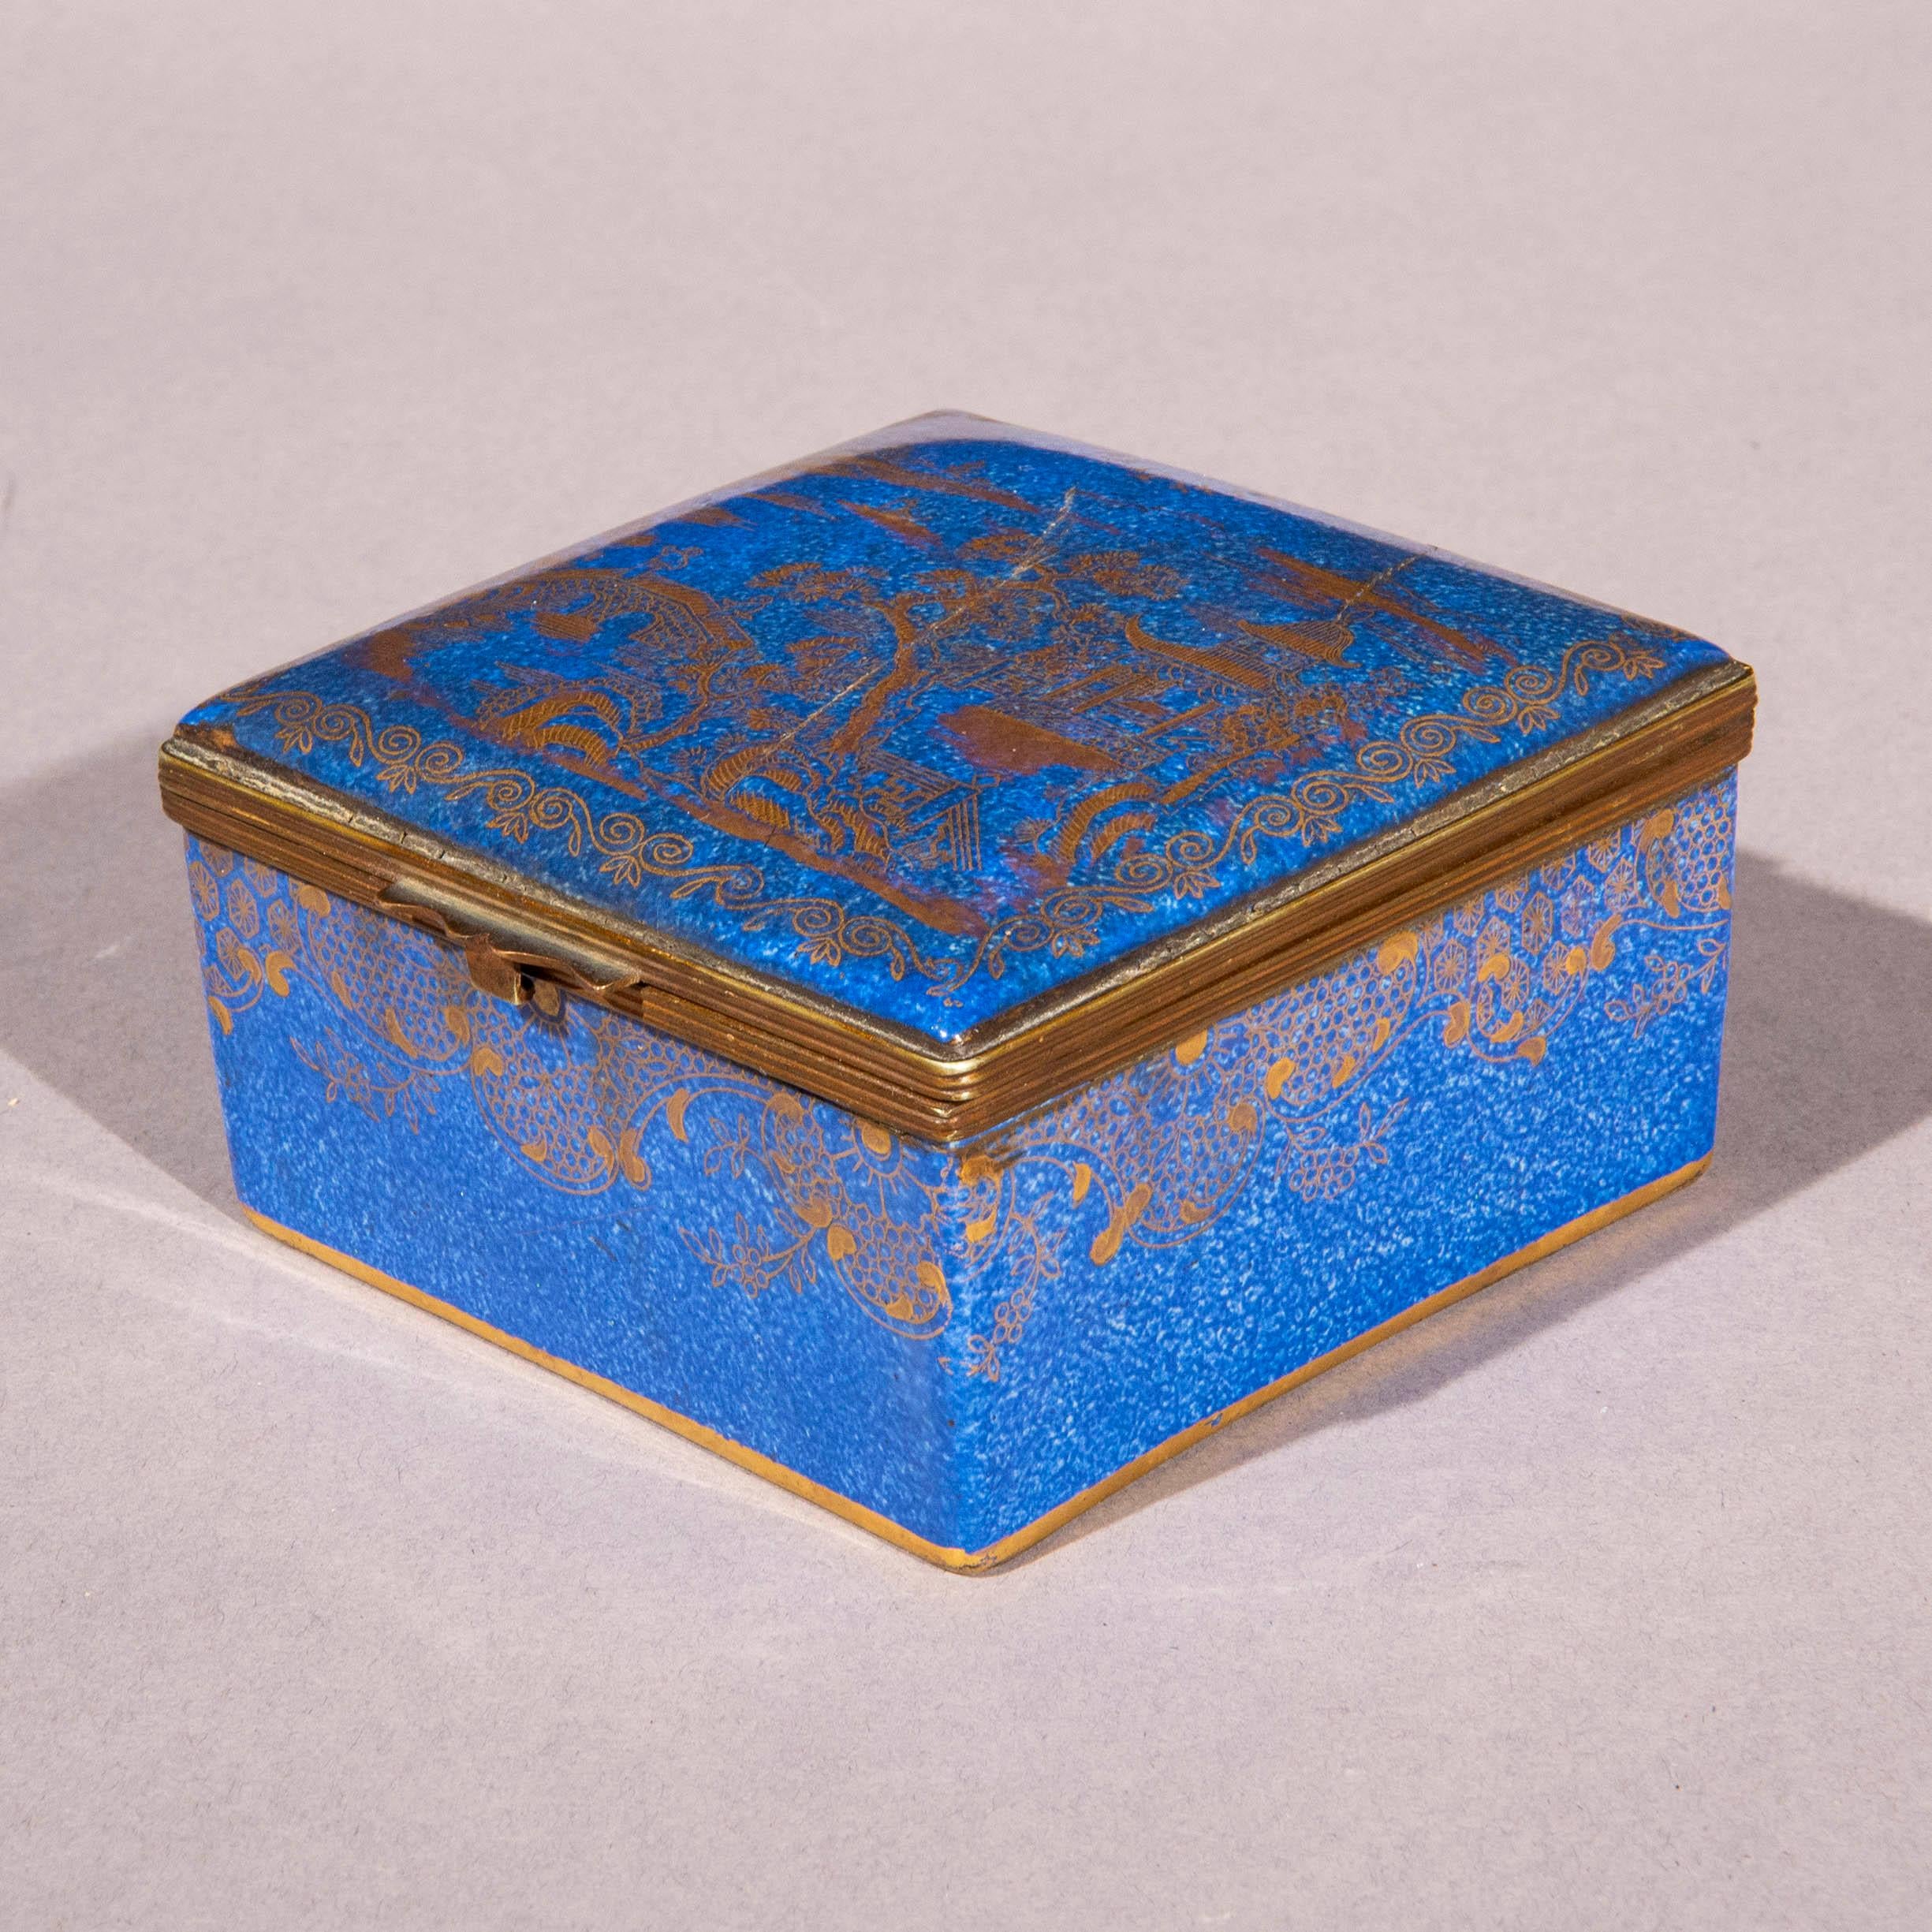 Antique Chinoiserie Blue Staffordshire Porcelain Box In Distressed Condition For Sale In London, GB